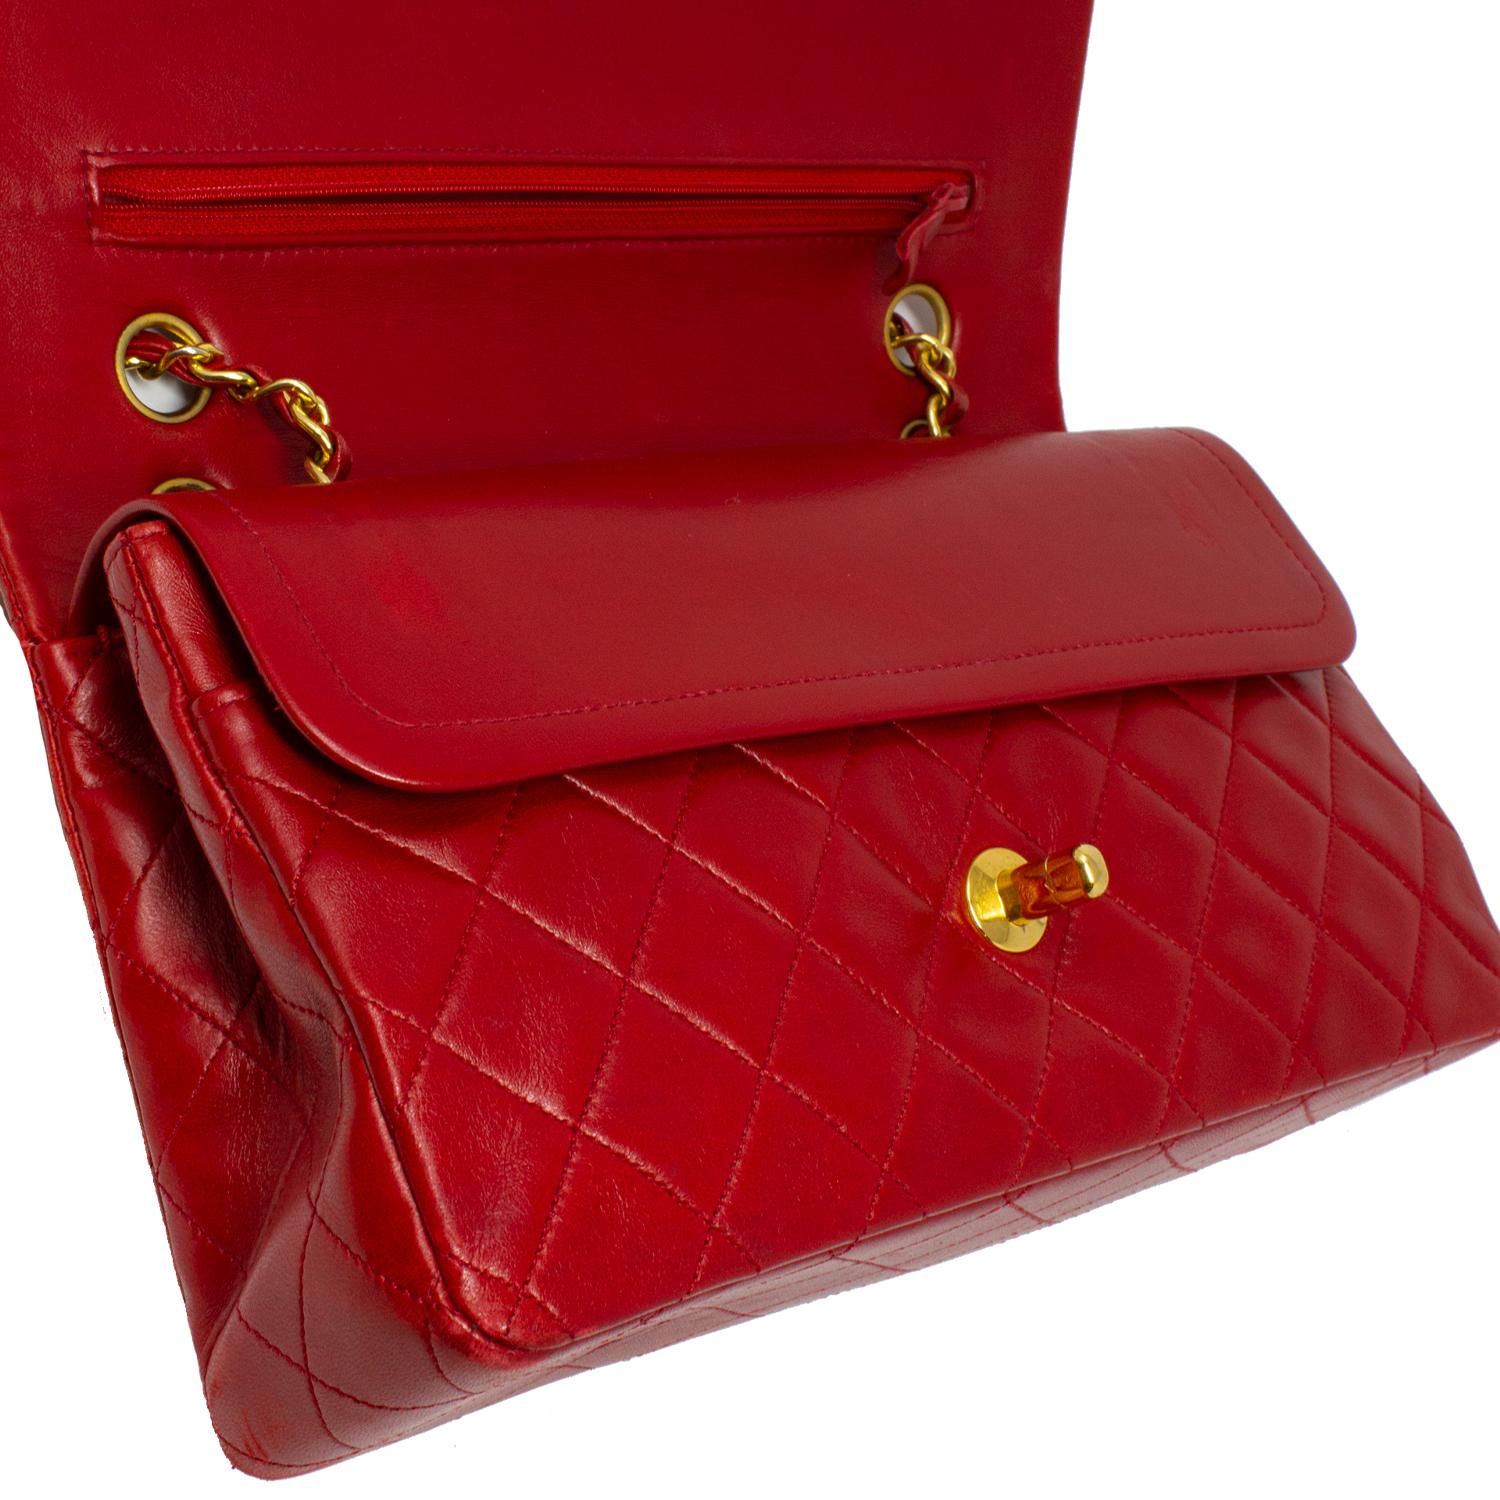 Chanel Medium Red Double Flap Bag 1